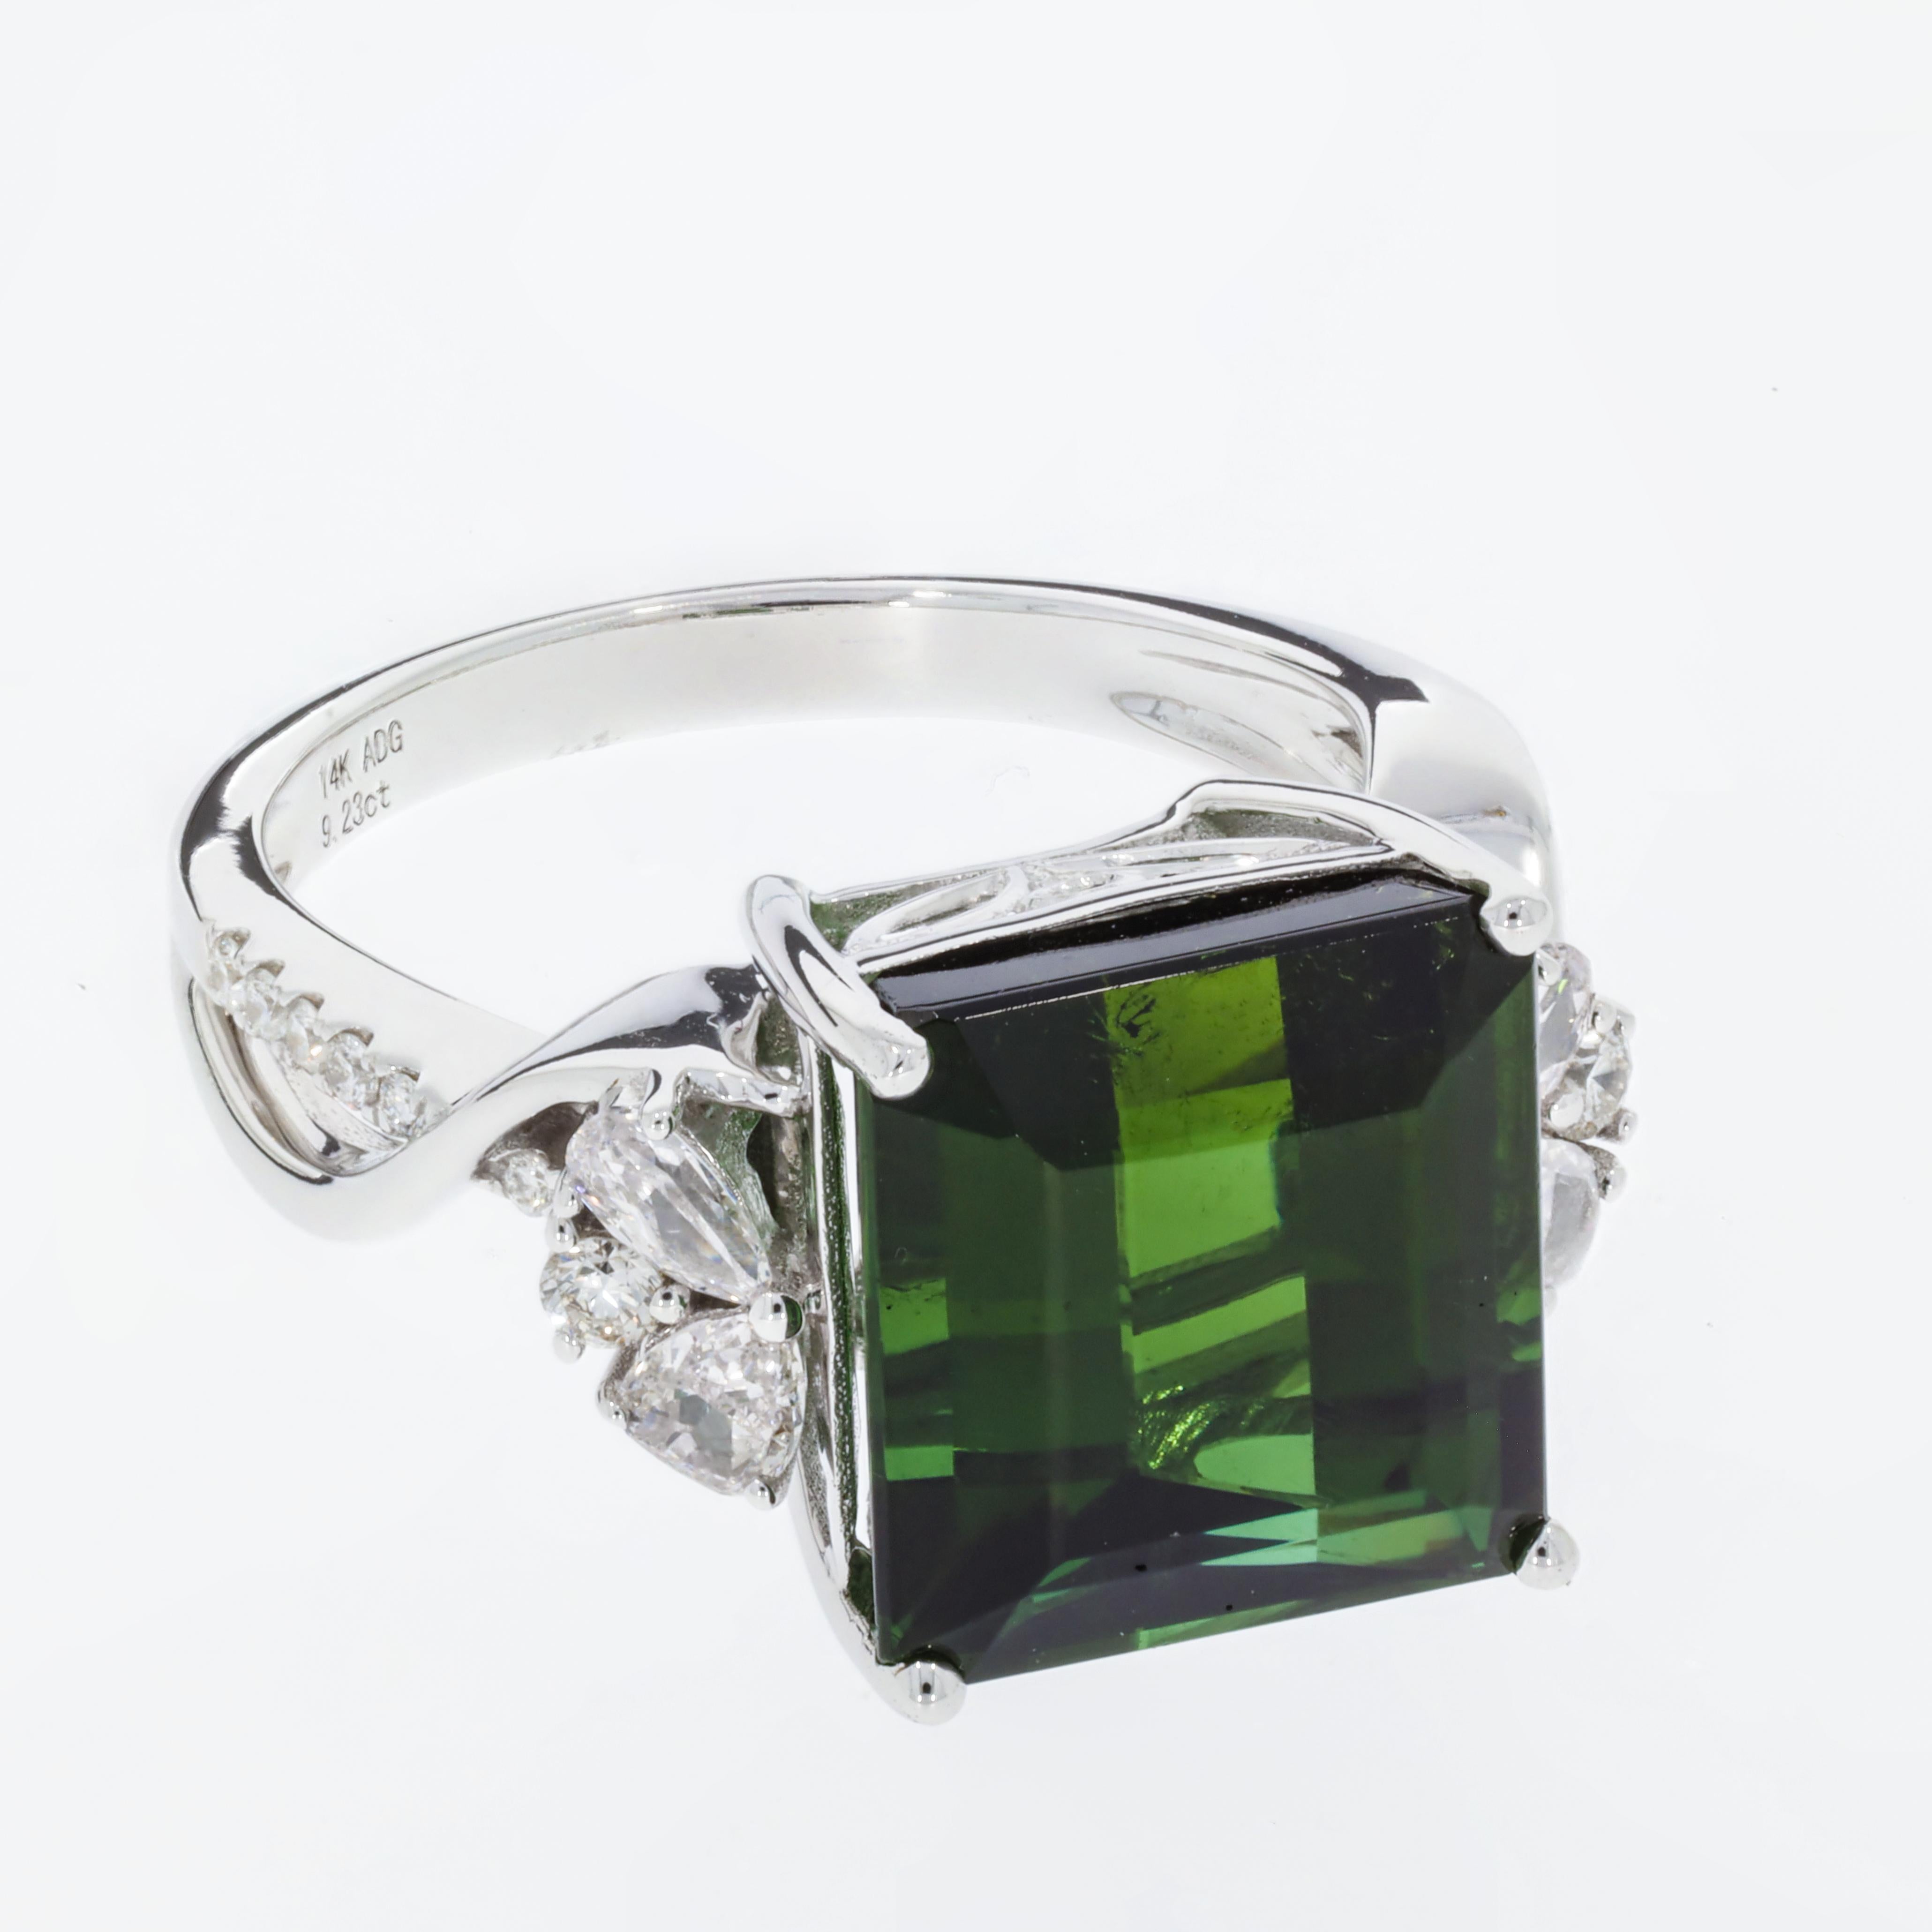 This classy piece would pair perfectly with everything in your wardrobe. Made with an exquisitely cut Emerald shape Green Tourmaline, this stone displays high clarity and is an excellent accessory. Accented with 0.48 ct of diamonds, this ring is an